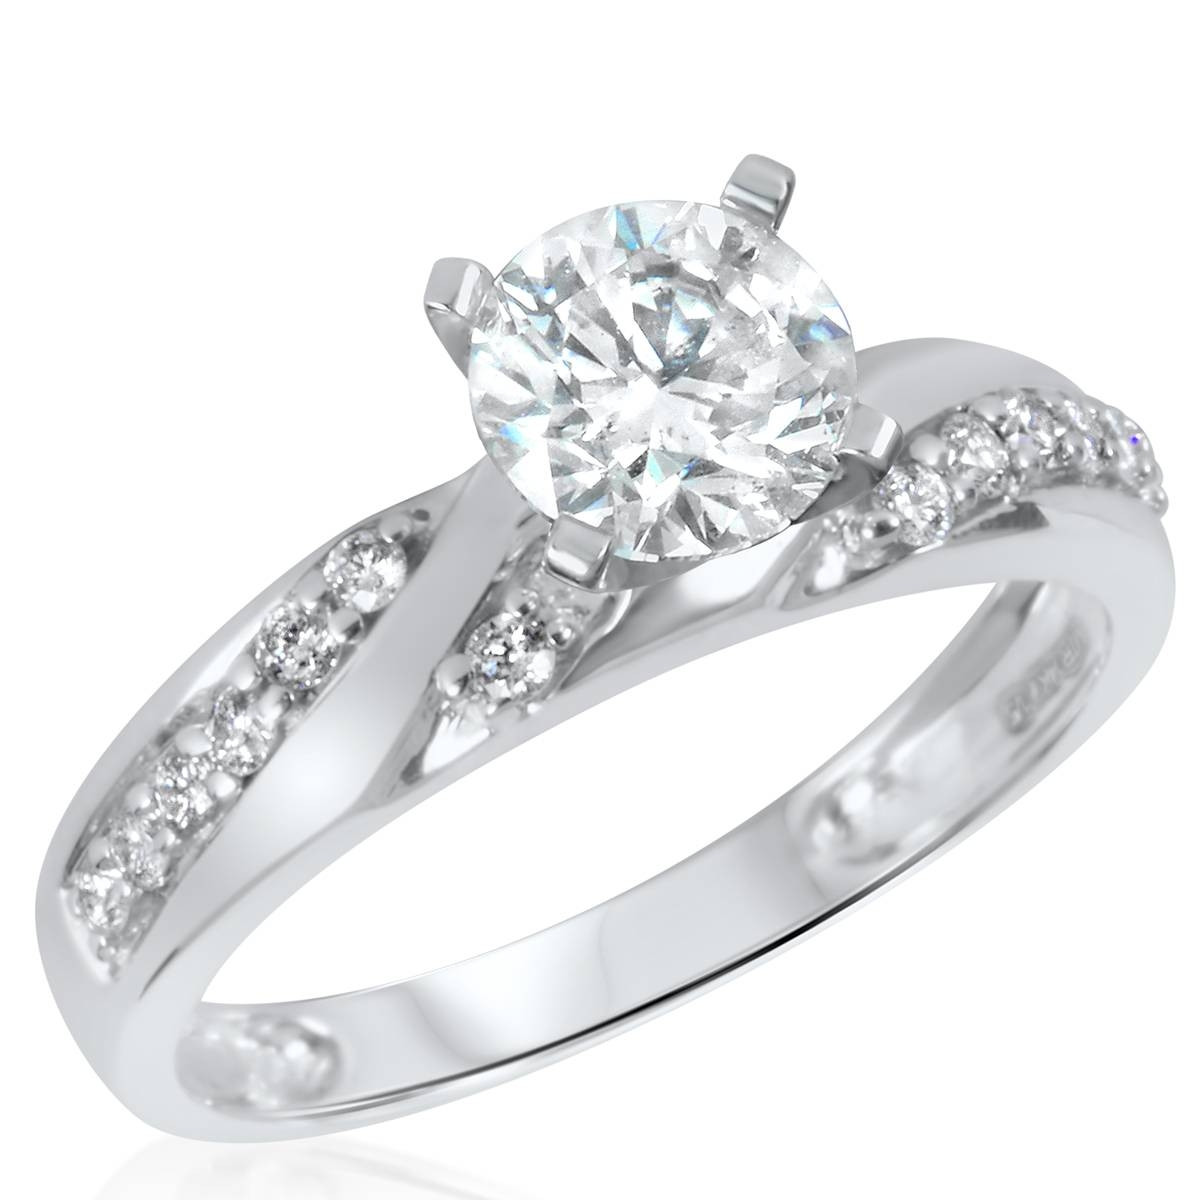 Best Wedding Rings For Women
 15 Best Collection of Cheap Wedding Bands For Her